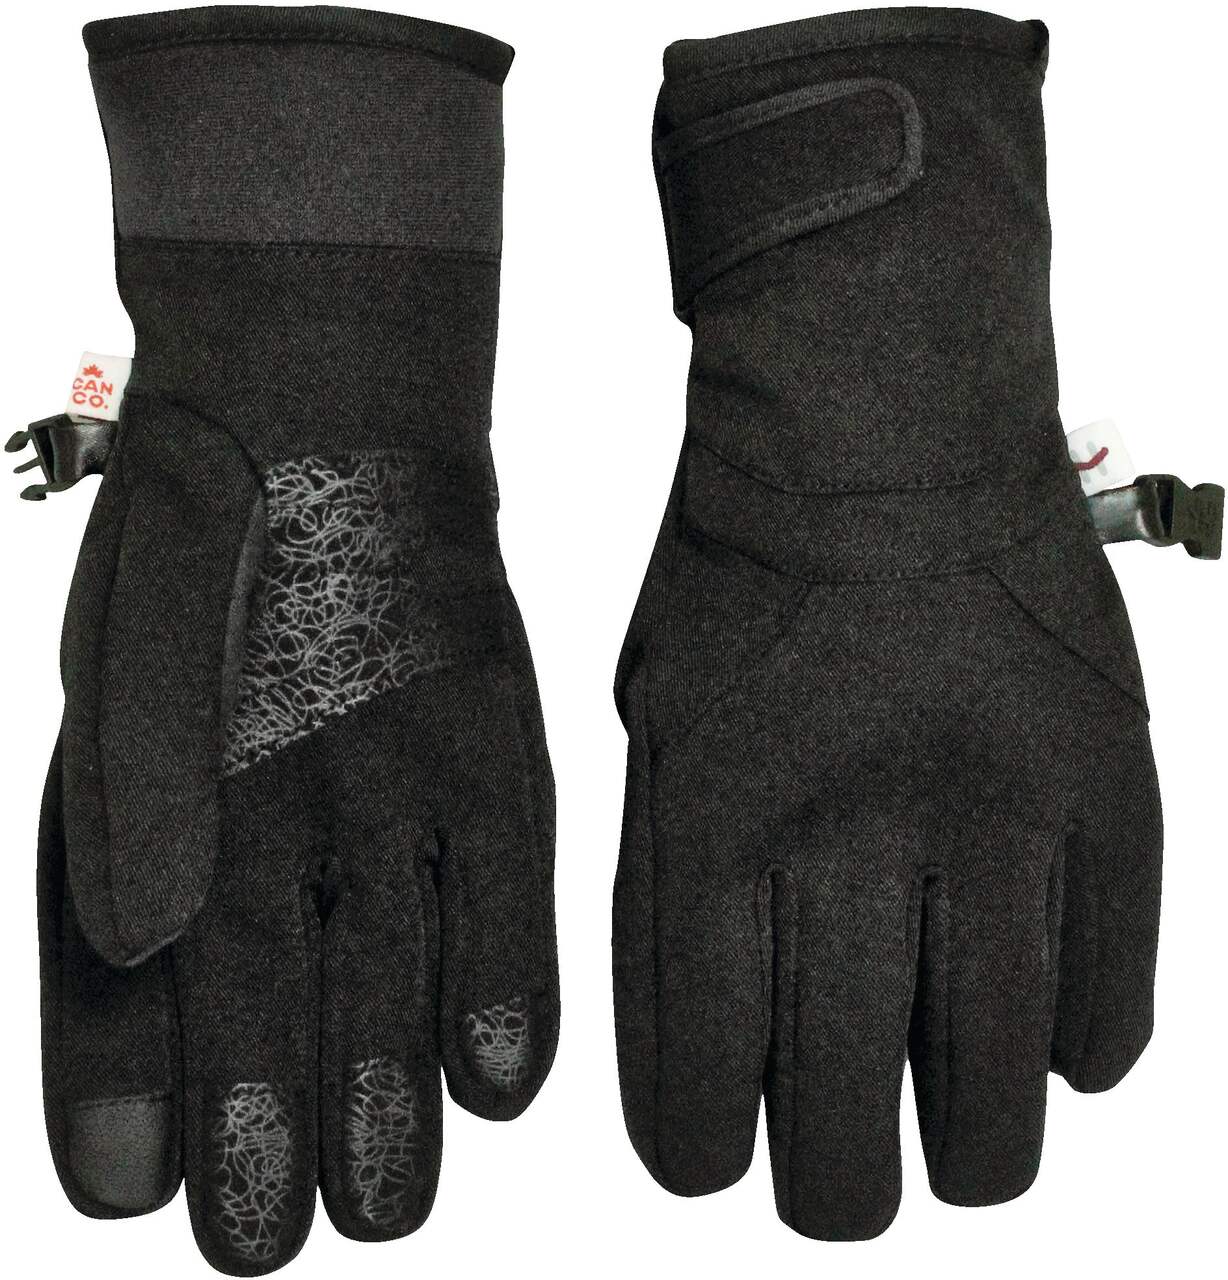 Hot Paws Women's Stretch Touch Screen Winter Casual Sport Gloves